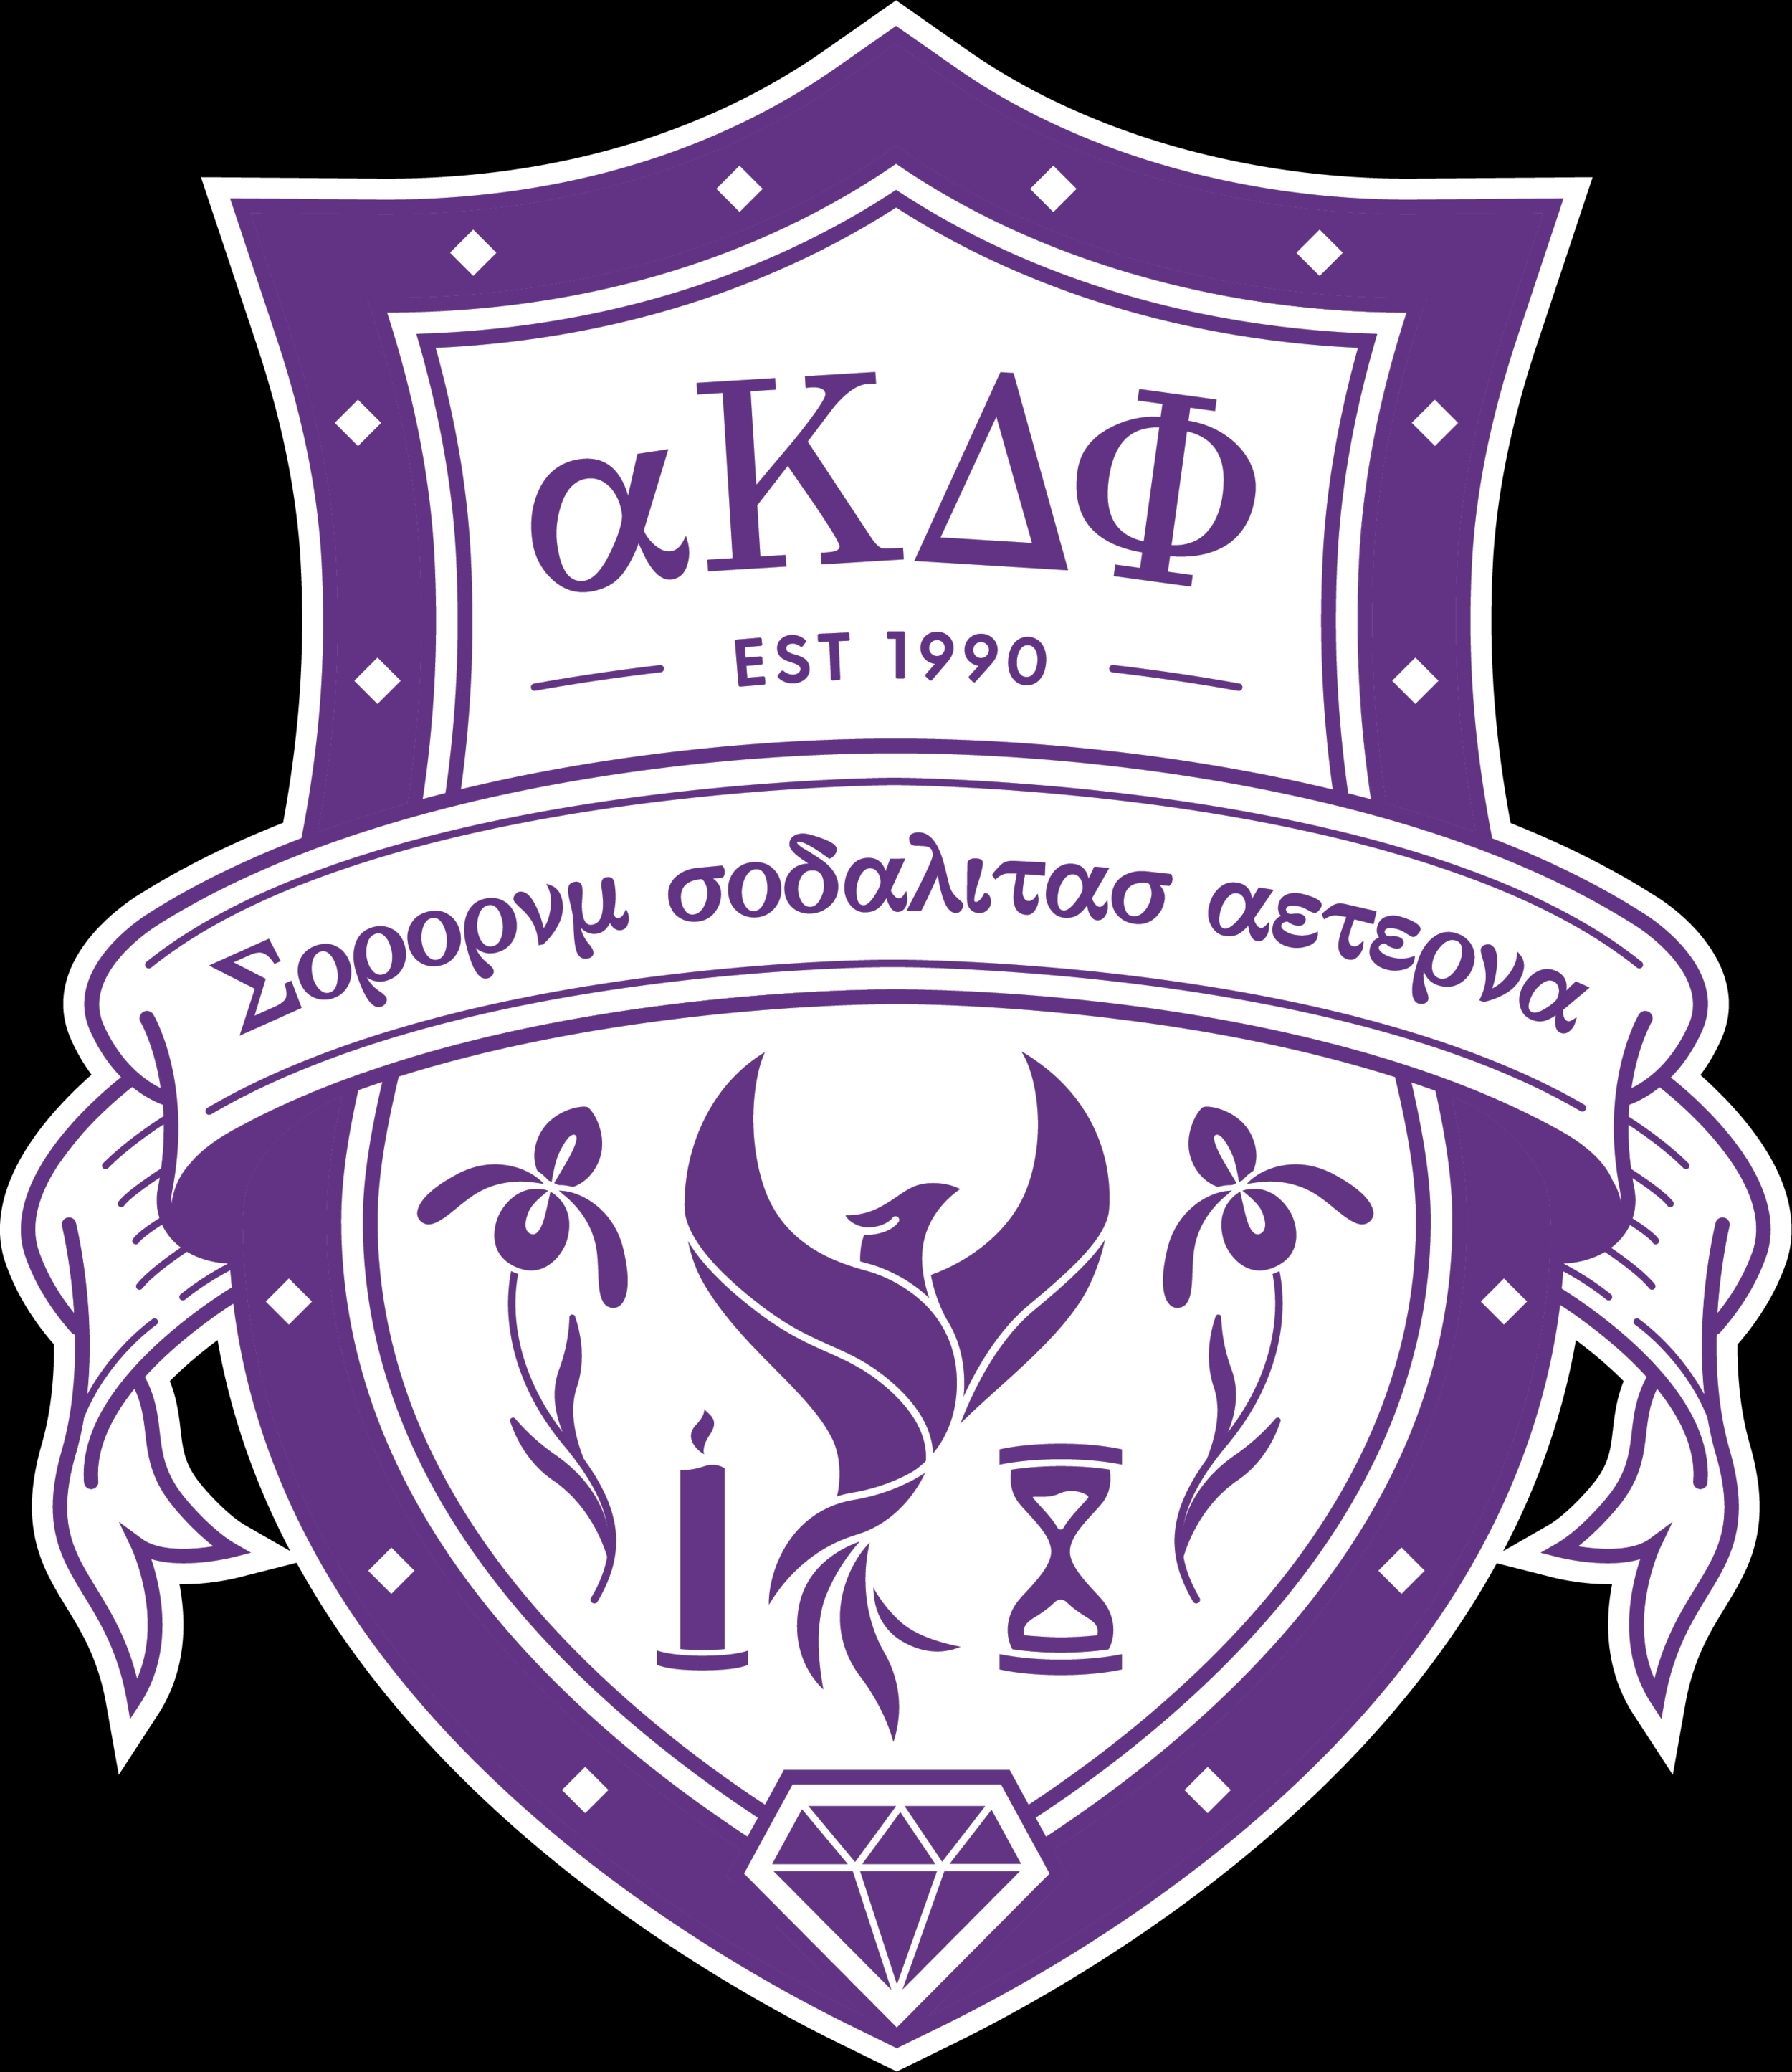 alpha Kappa Delta Phi crest showing colors of purple and white